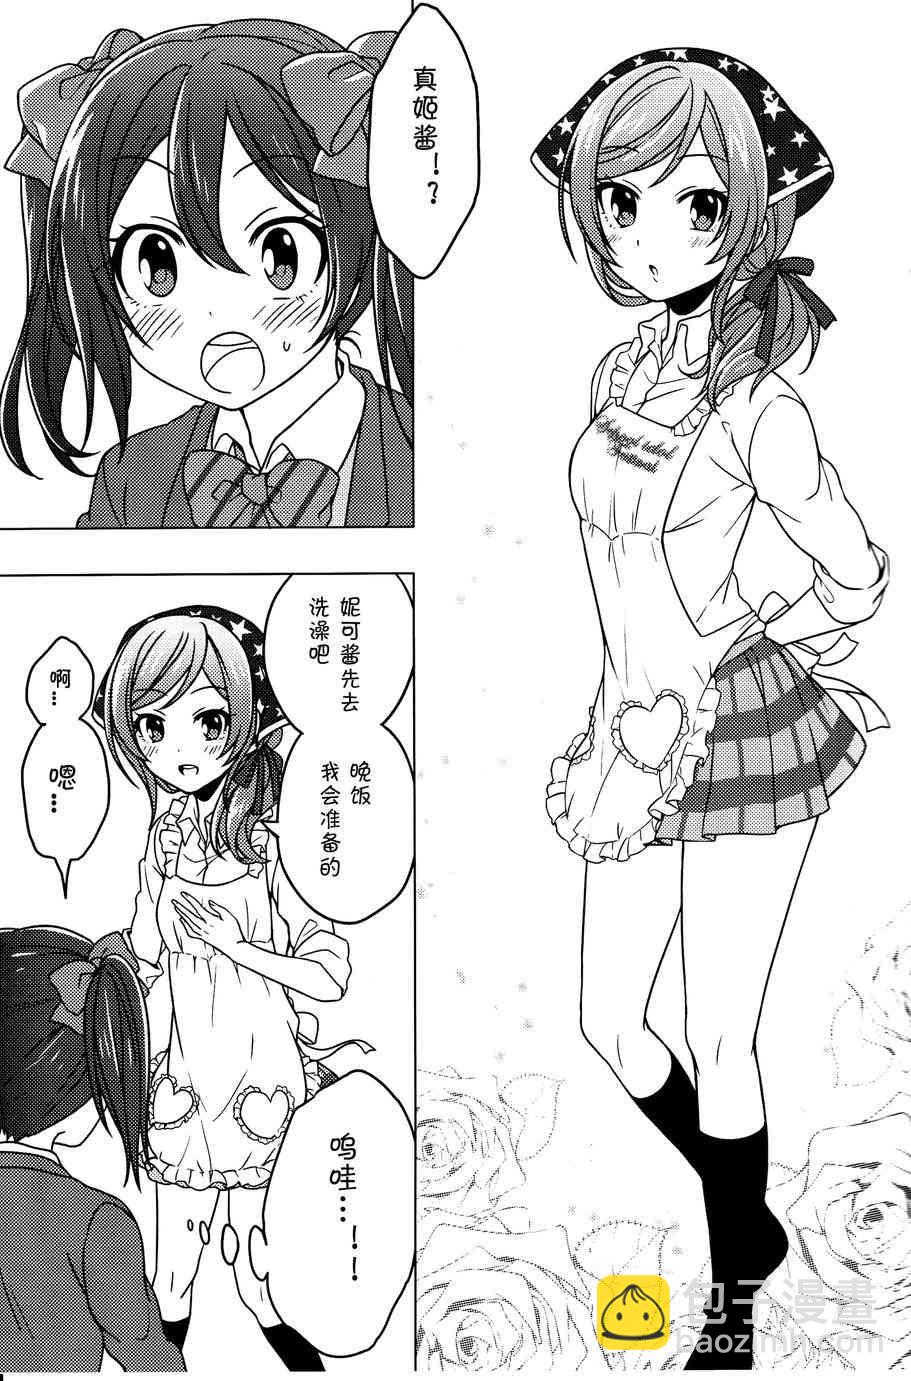 LoveLive - 幸福OVERLOAD - 3